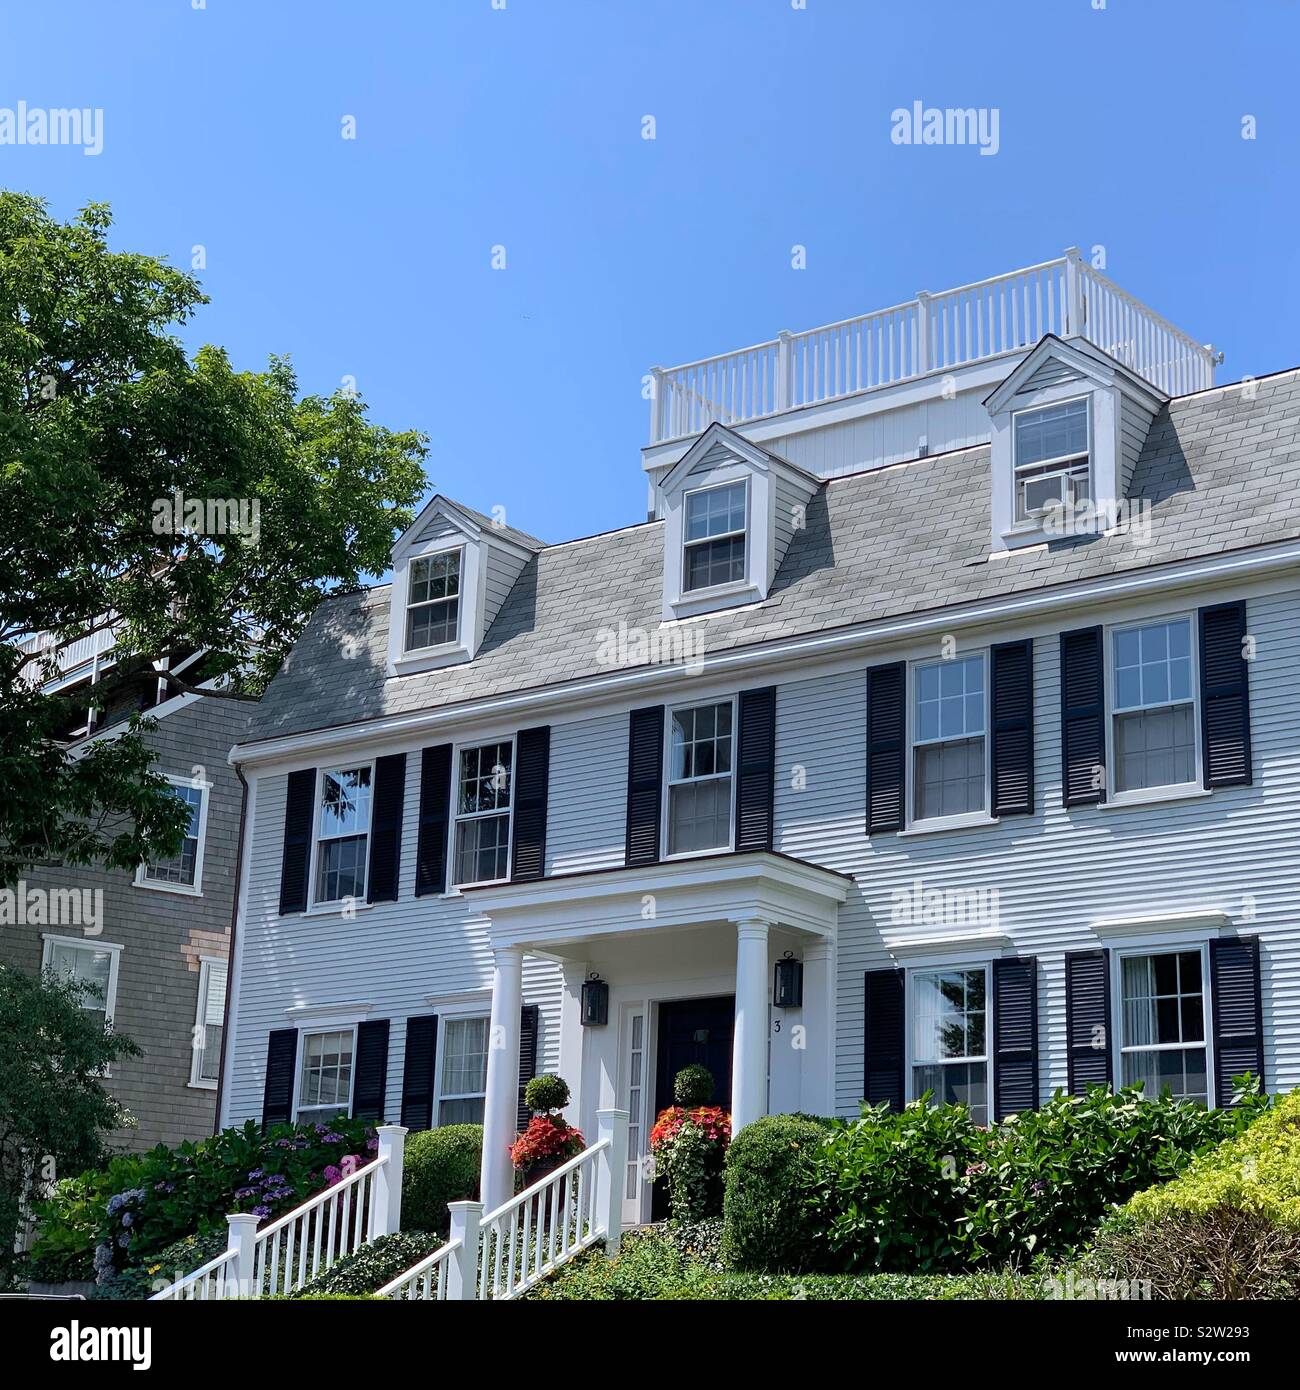 A home in Nantucket Town, Nantucket Island, Massachusetts, United States Stock Photo